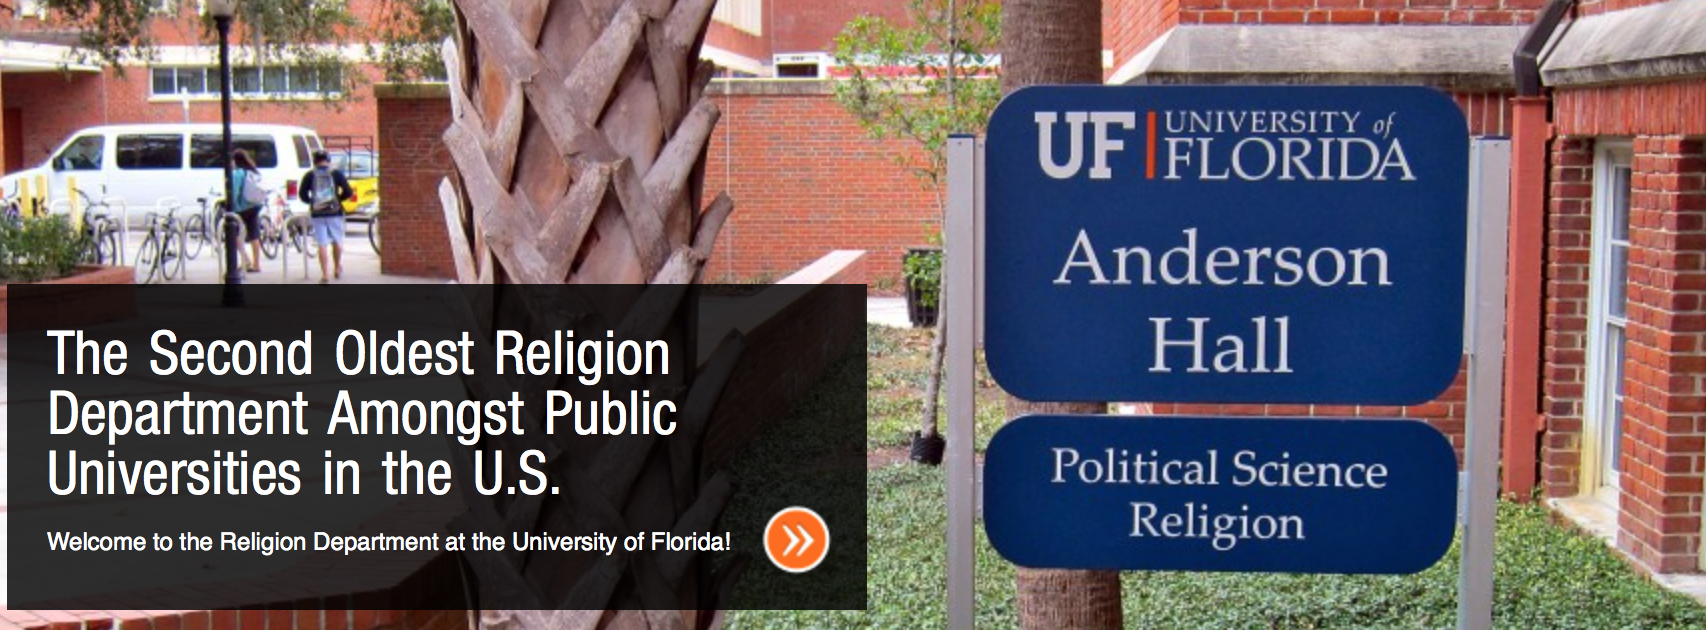 The University of Florida's religion department is interdisciplinary in nature. In approaching religion, the program encourages students to draw on work in the humanities, social sciences, and natural sciences